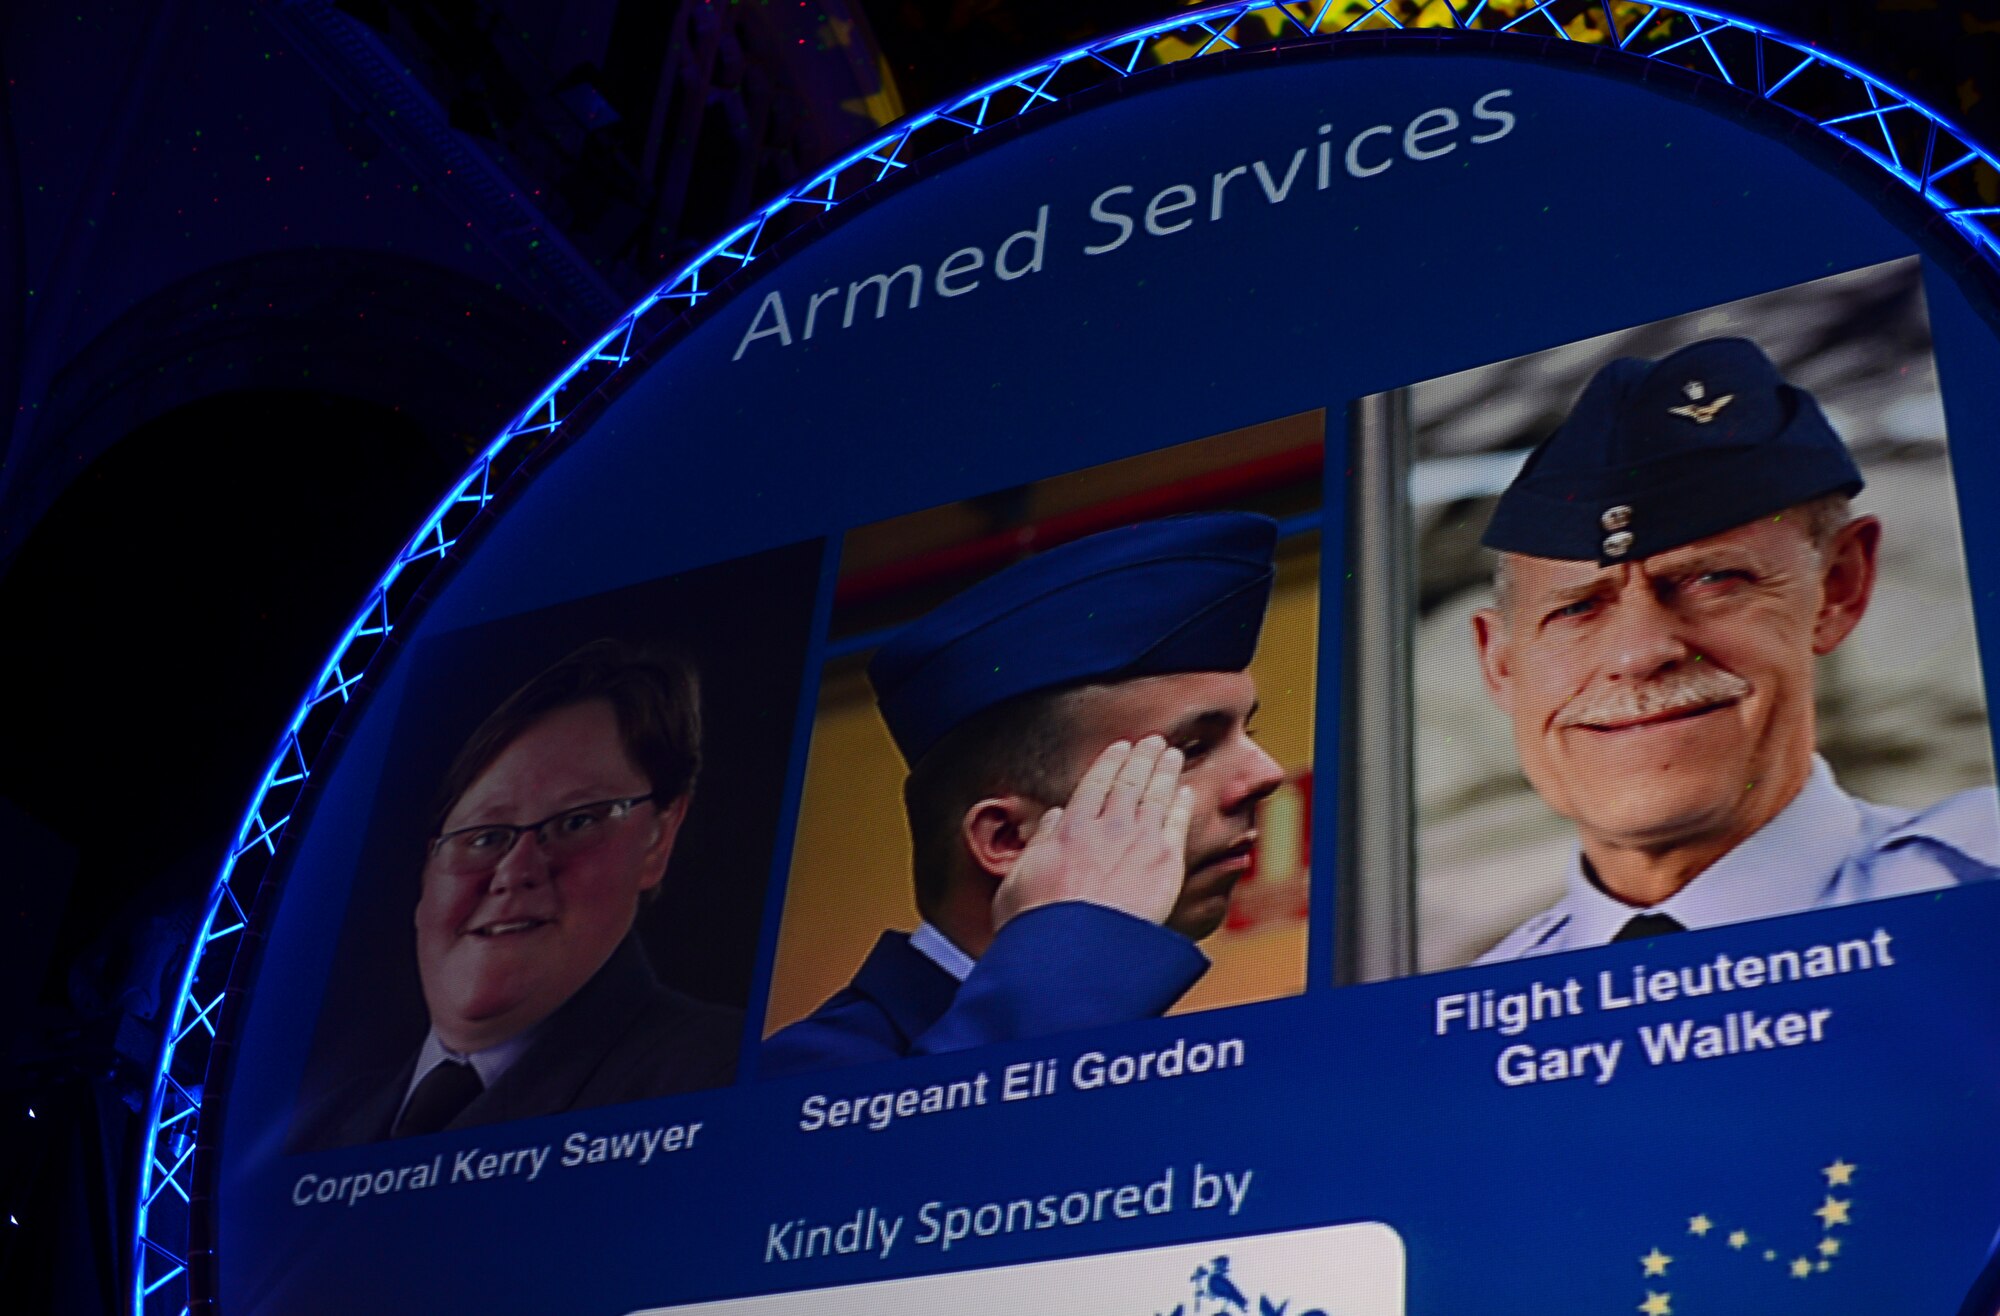 Nominees for the Armed Services Person of the Year award are announced during the Stars of Norfolk and Waveney Awards ceremony at St. Andrews Hall, Norfolk, England, Dec. 3, 2015. Nominees from various categories were recognized for their selfless acts and displays of courage within the local community. (U.S. Air Force photo by Senior Airman Erin Trower)